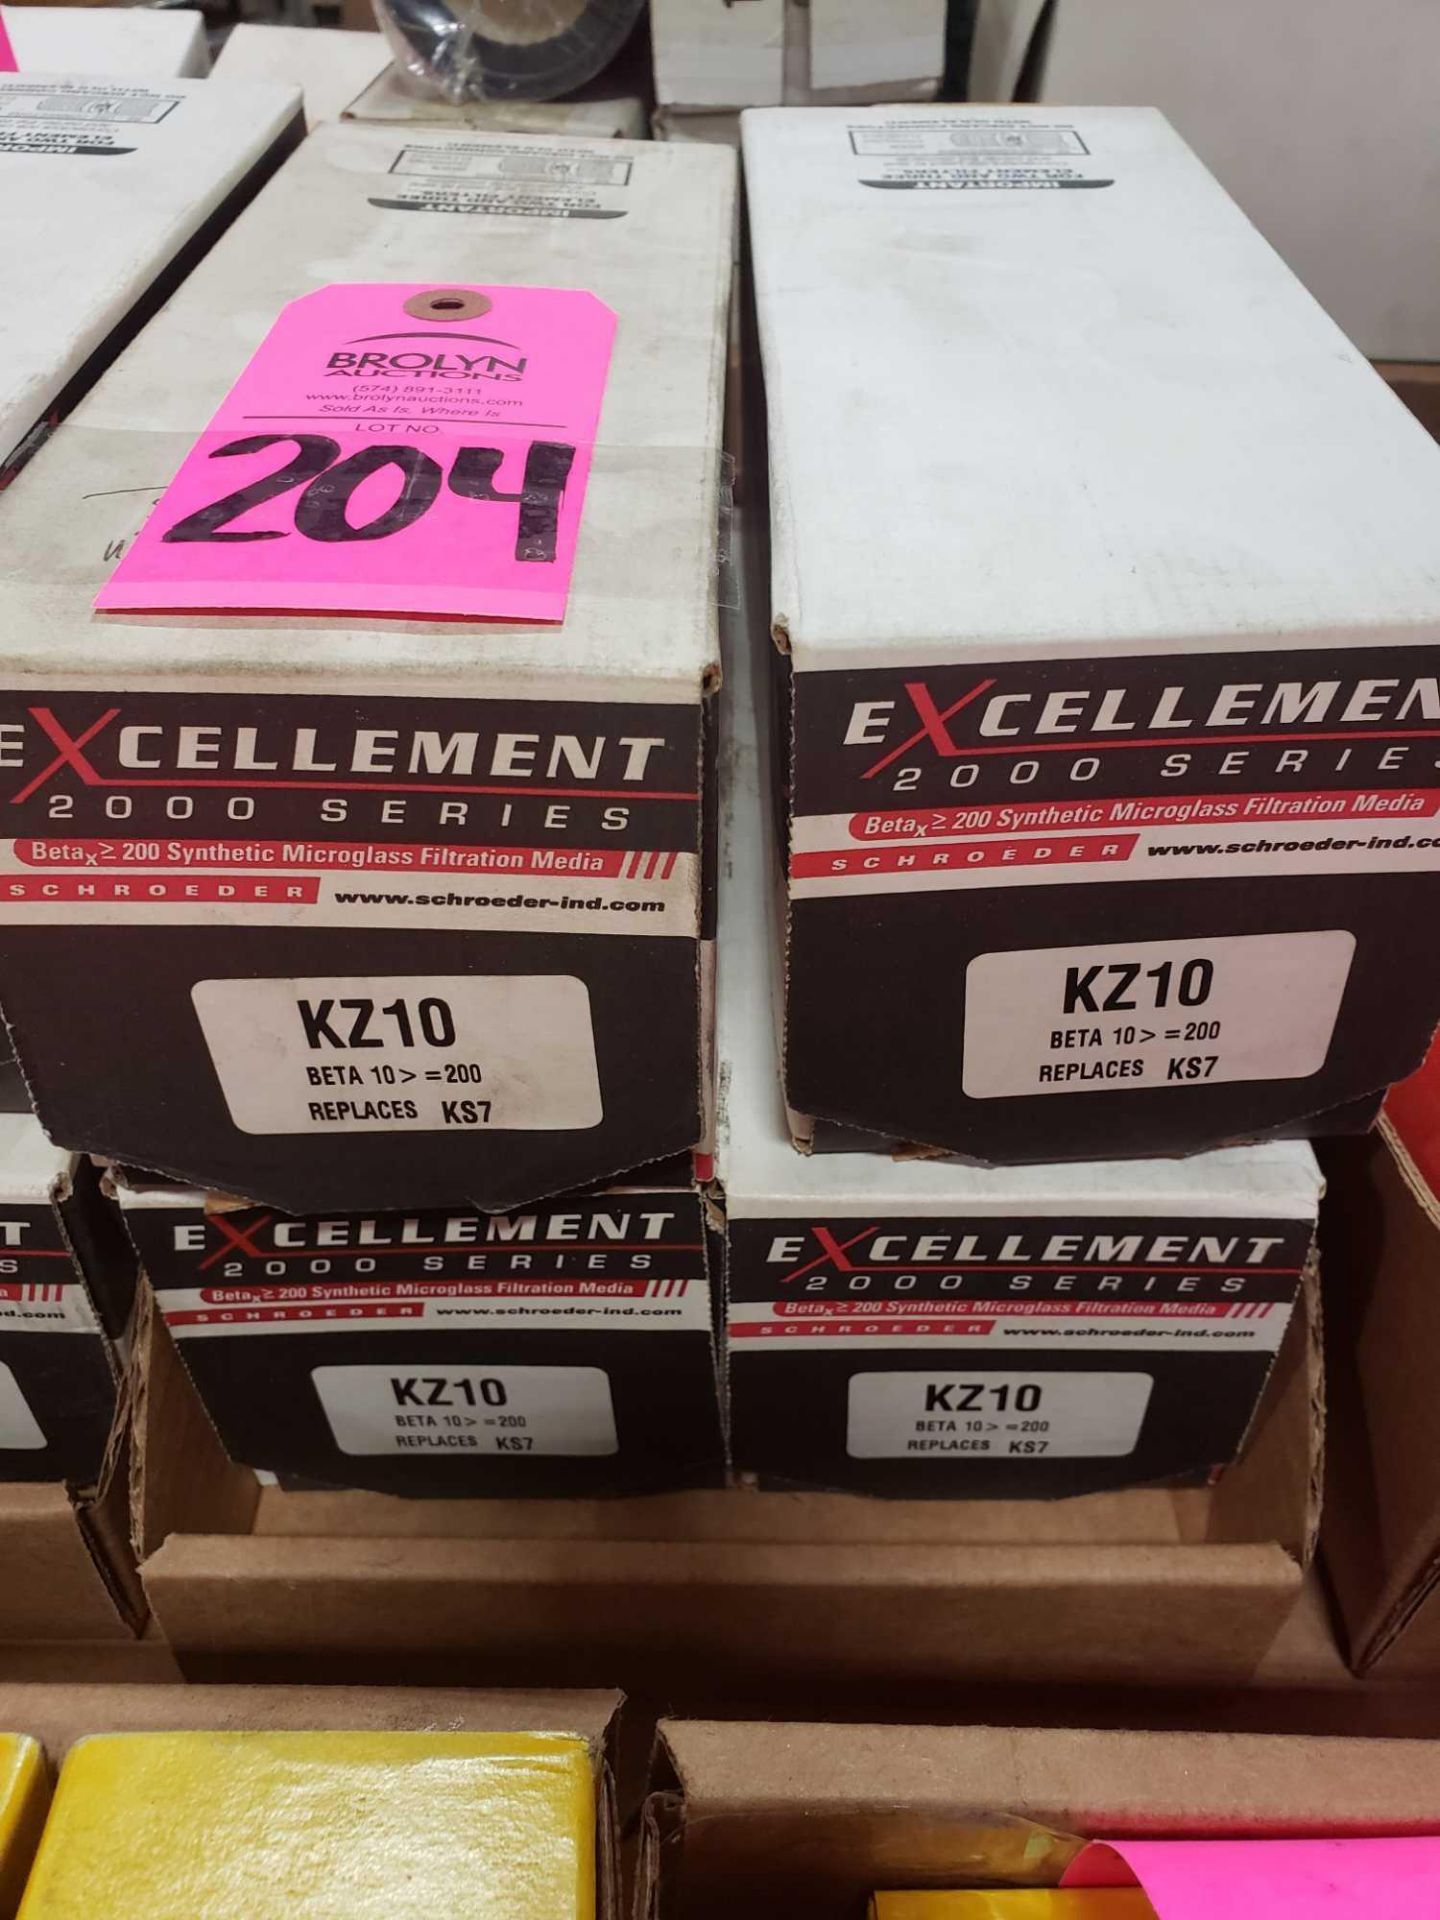 Qty 4 - Excellement filter element model KZ10. New in box.